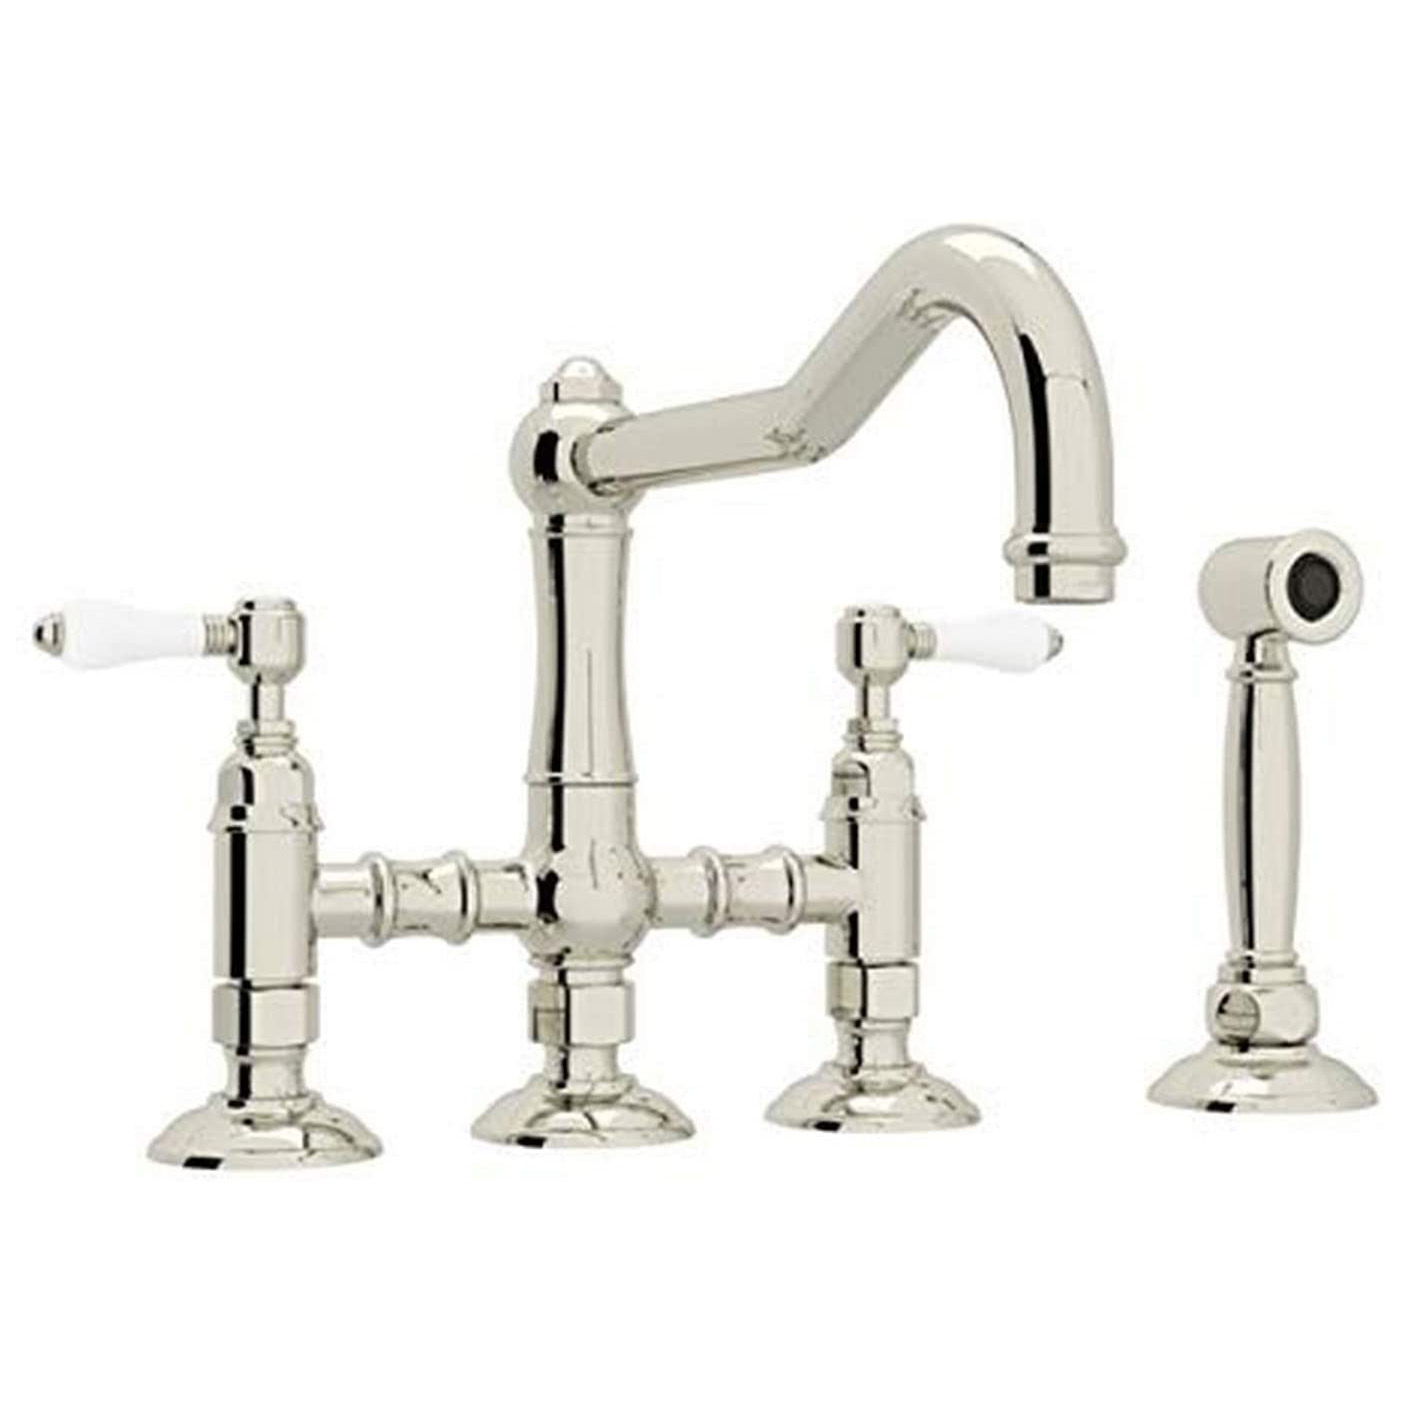 Country Bridge Faucet w/Sidespray & Porcelain Levers in Polished Nickel